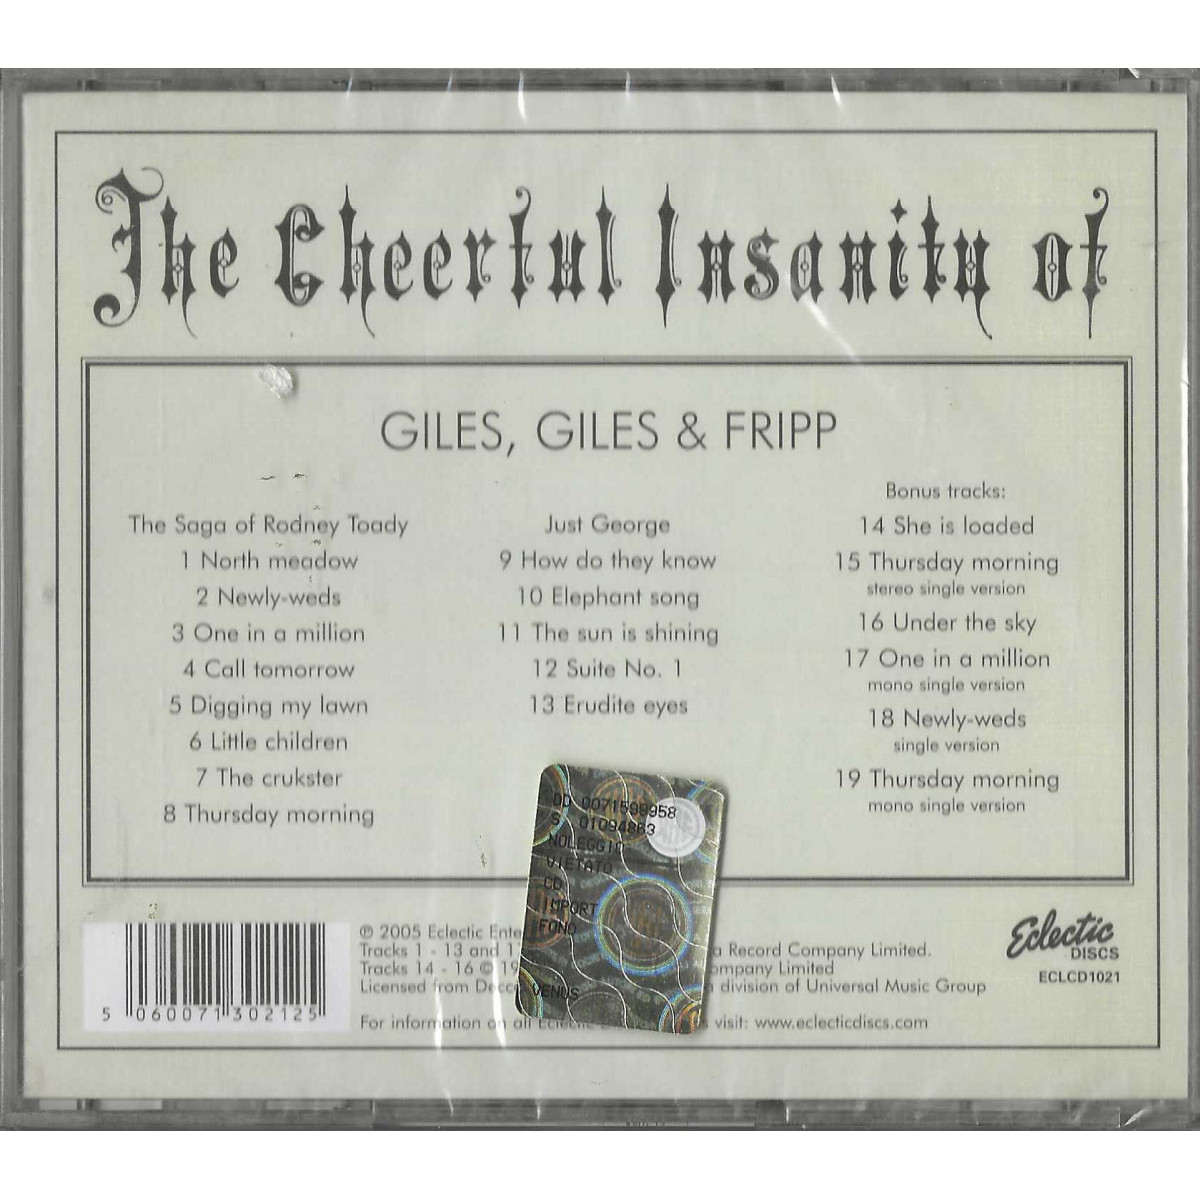 The Cheerful Insanity of Giles, Giles and Fripp by Giles, Giles